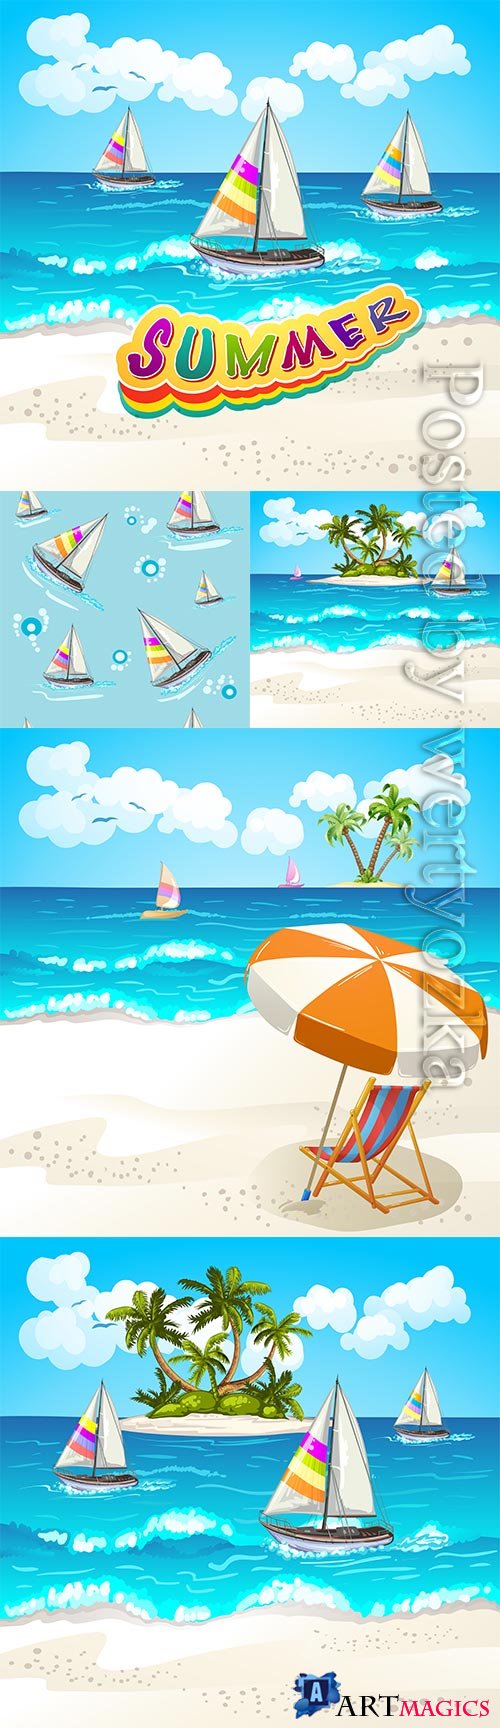 Summer vacation, sea, palm trees, cocktails in vector vol 9